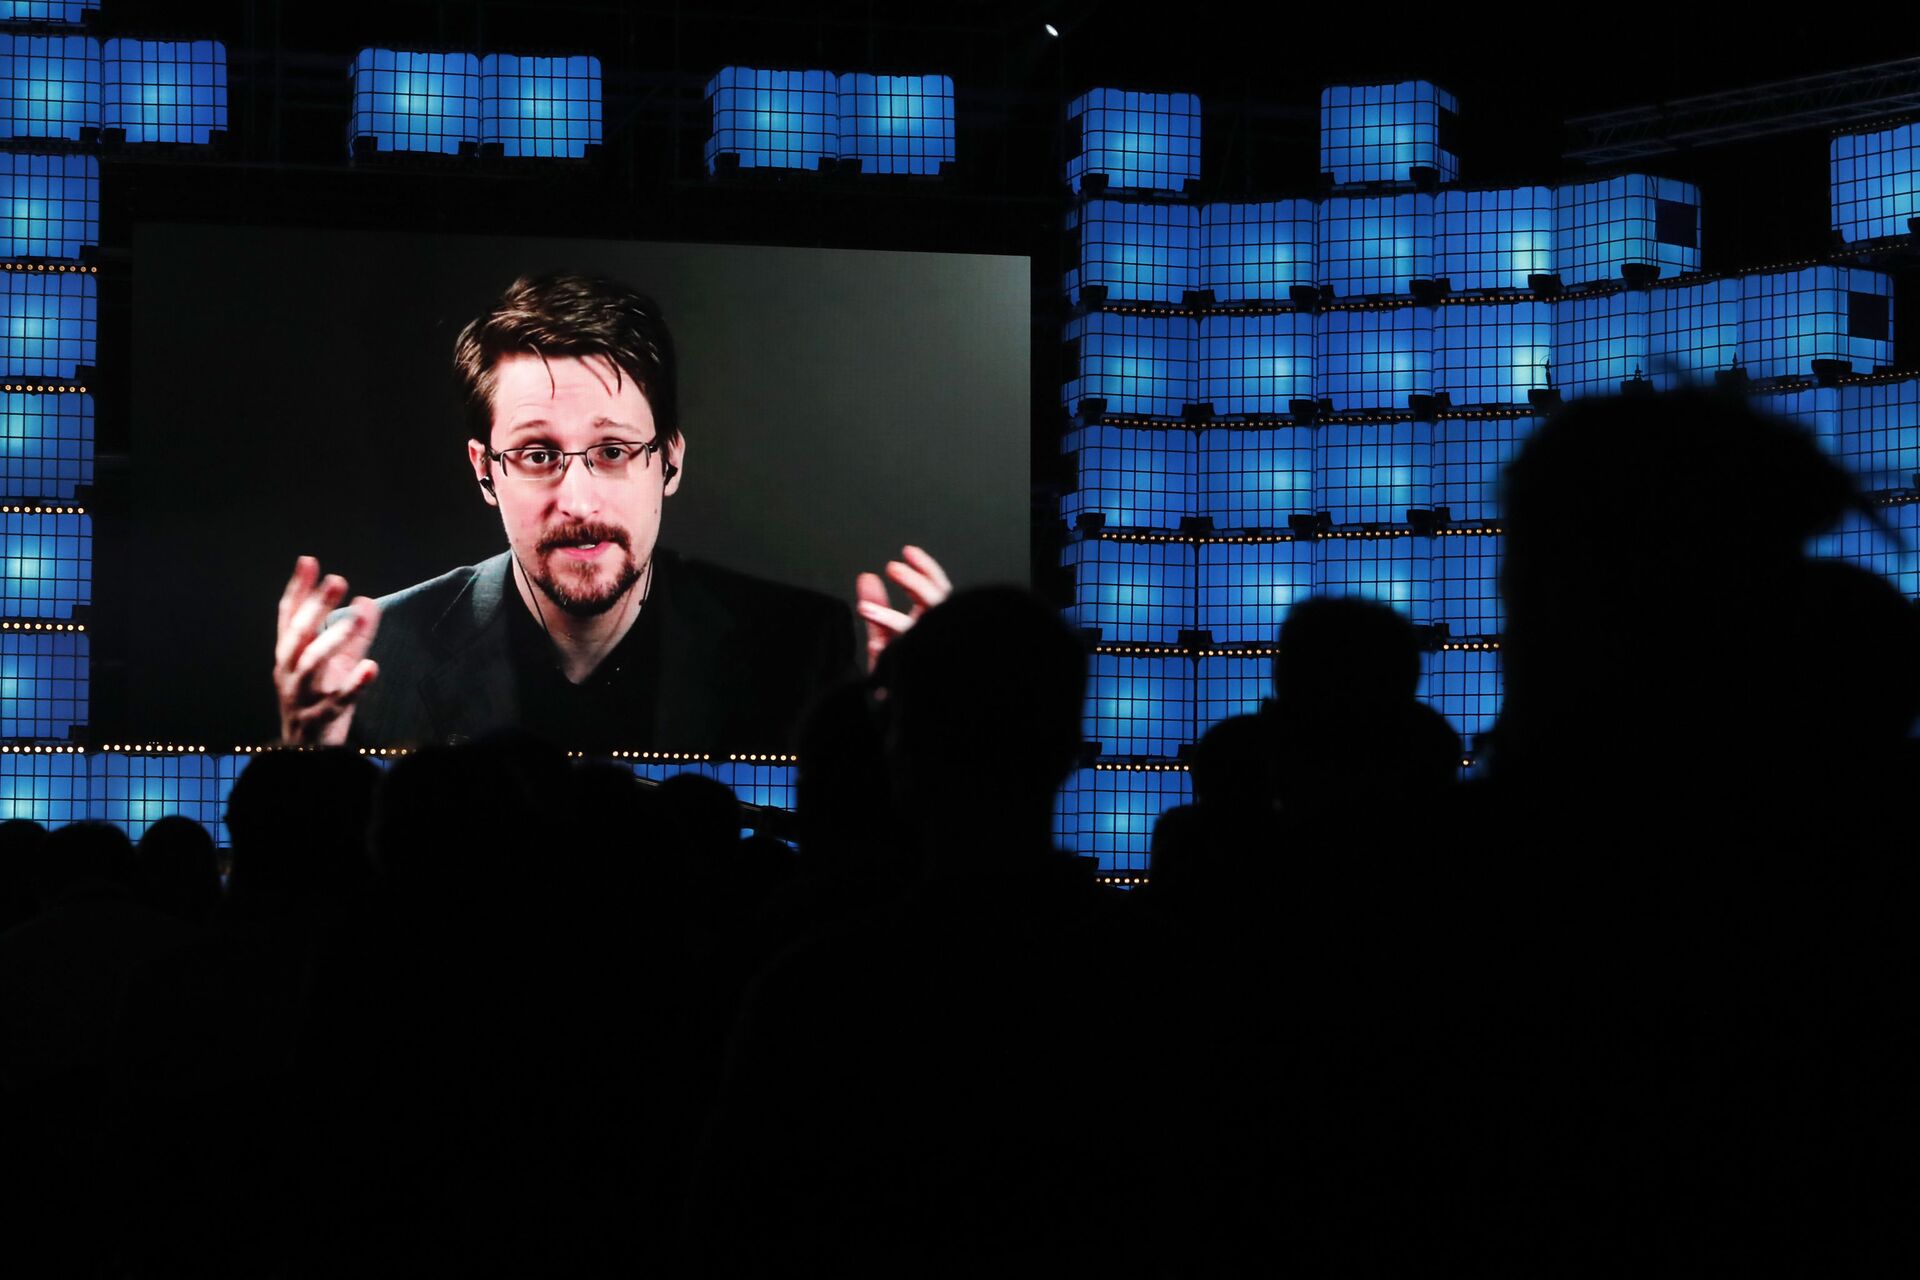 Former U.S. National Security Agency contractor Edward Snowden addresses attendees through video link at the Web Summit technology conference in Lisbon, Monday, Nov. 4, 2019 - Sputnik International, 1920, 07.09.2021